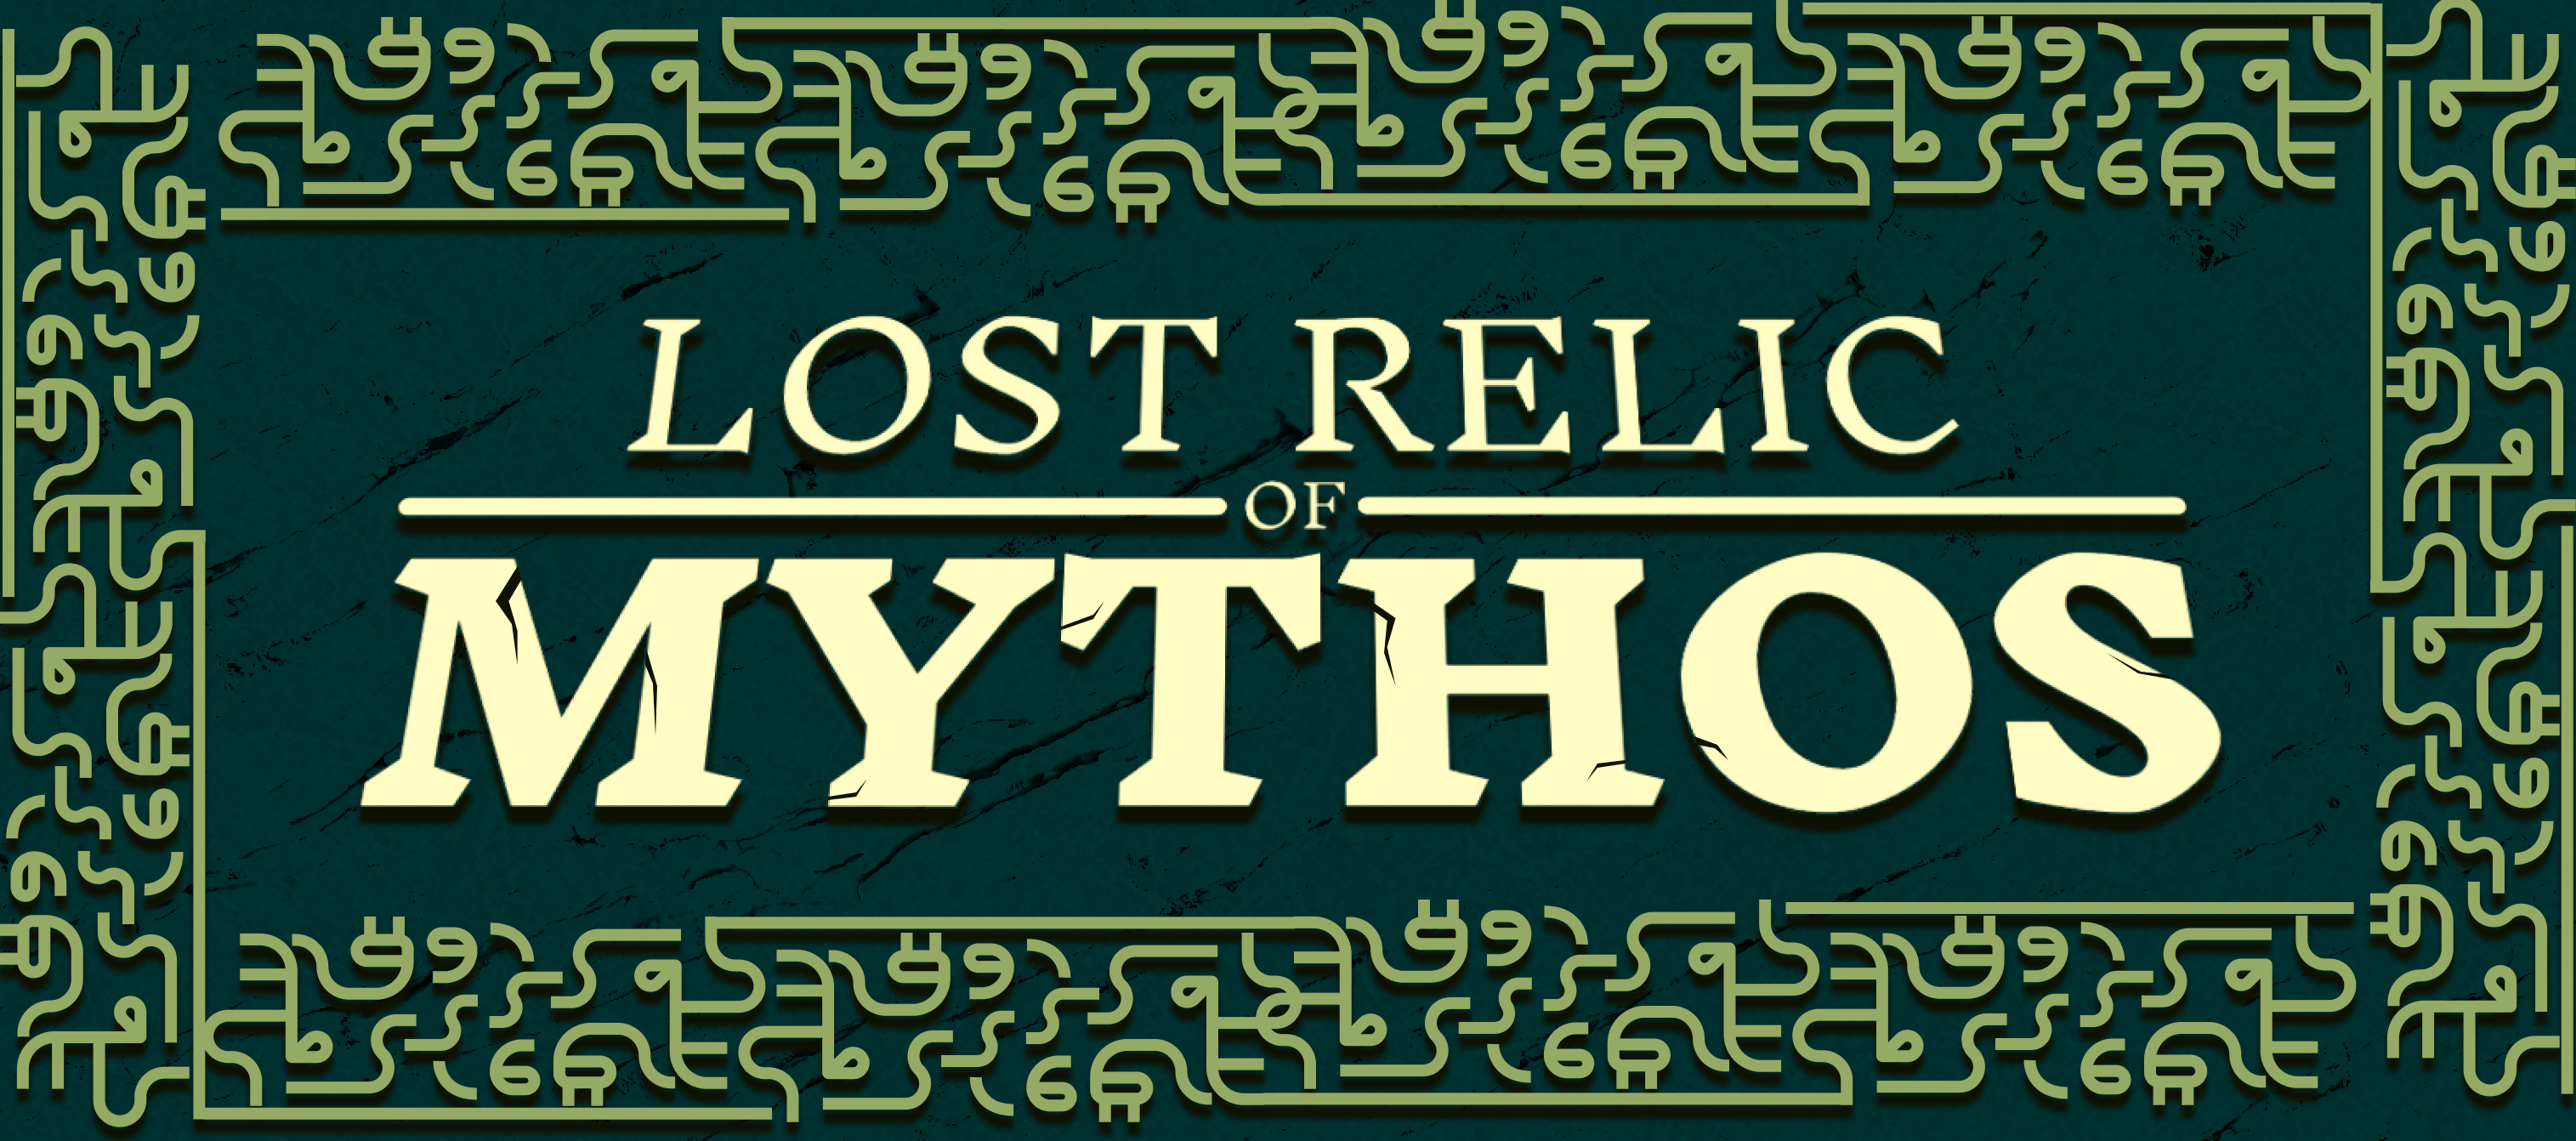 Lost Relic of Mythos